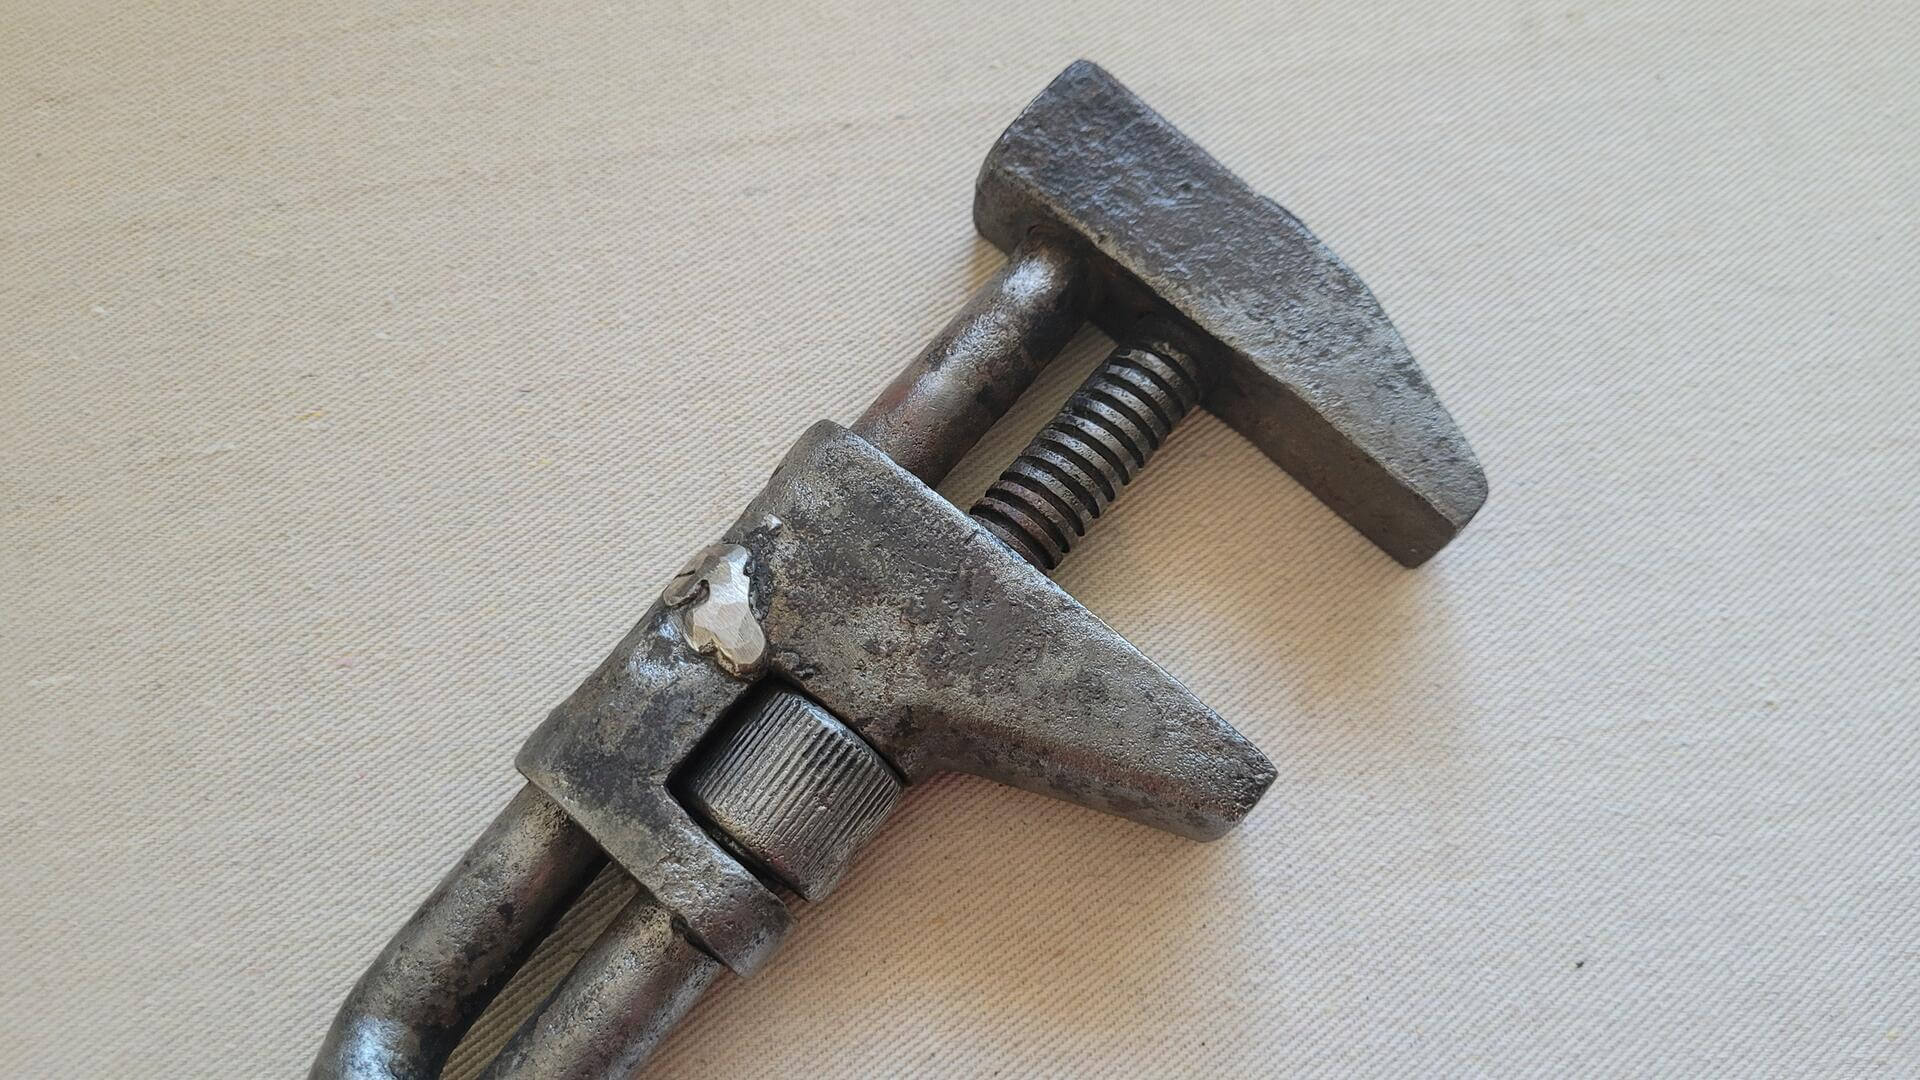 Primitive Acme twist handle adjustable plumbing monkey wrench 14 inches in length and 2 1/4 jaw by rederick H. Seymour Pat. No. 273,170. Antique made in USA collectible tools